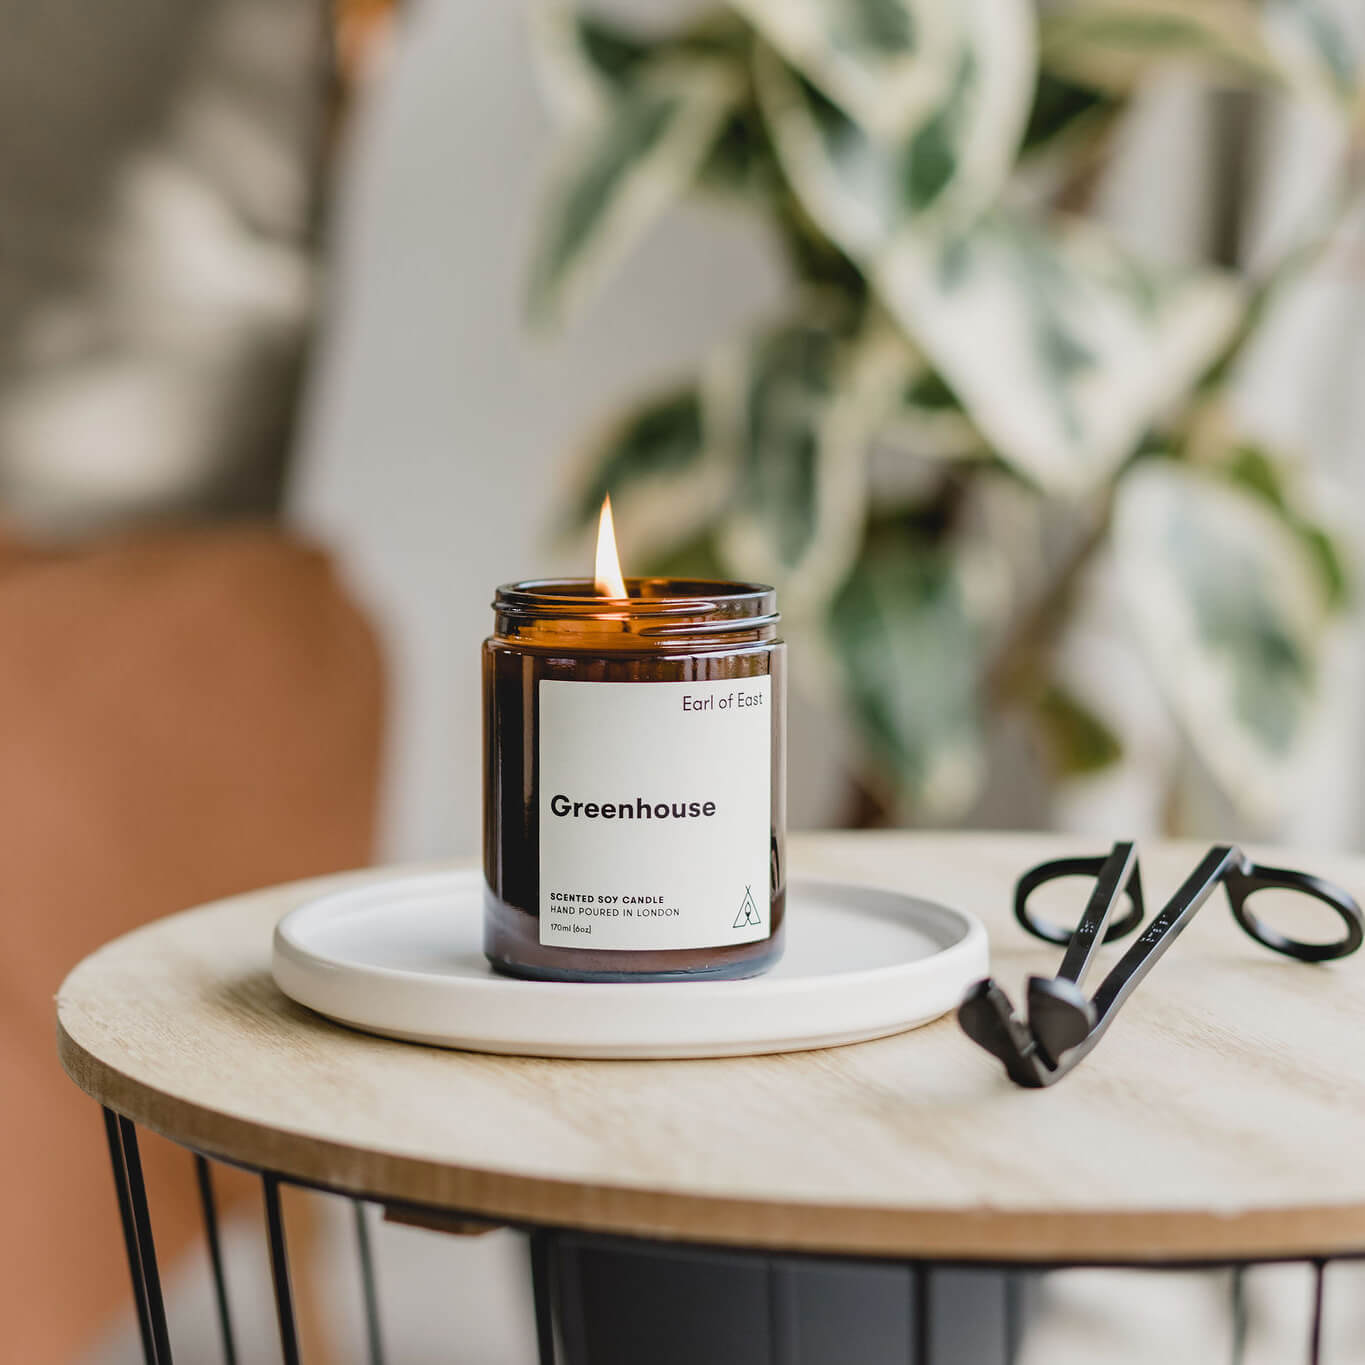 Greenhouse Scented Candle by Earl of East London